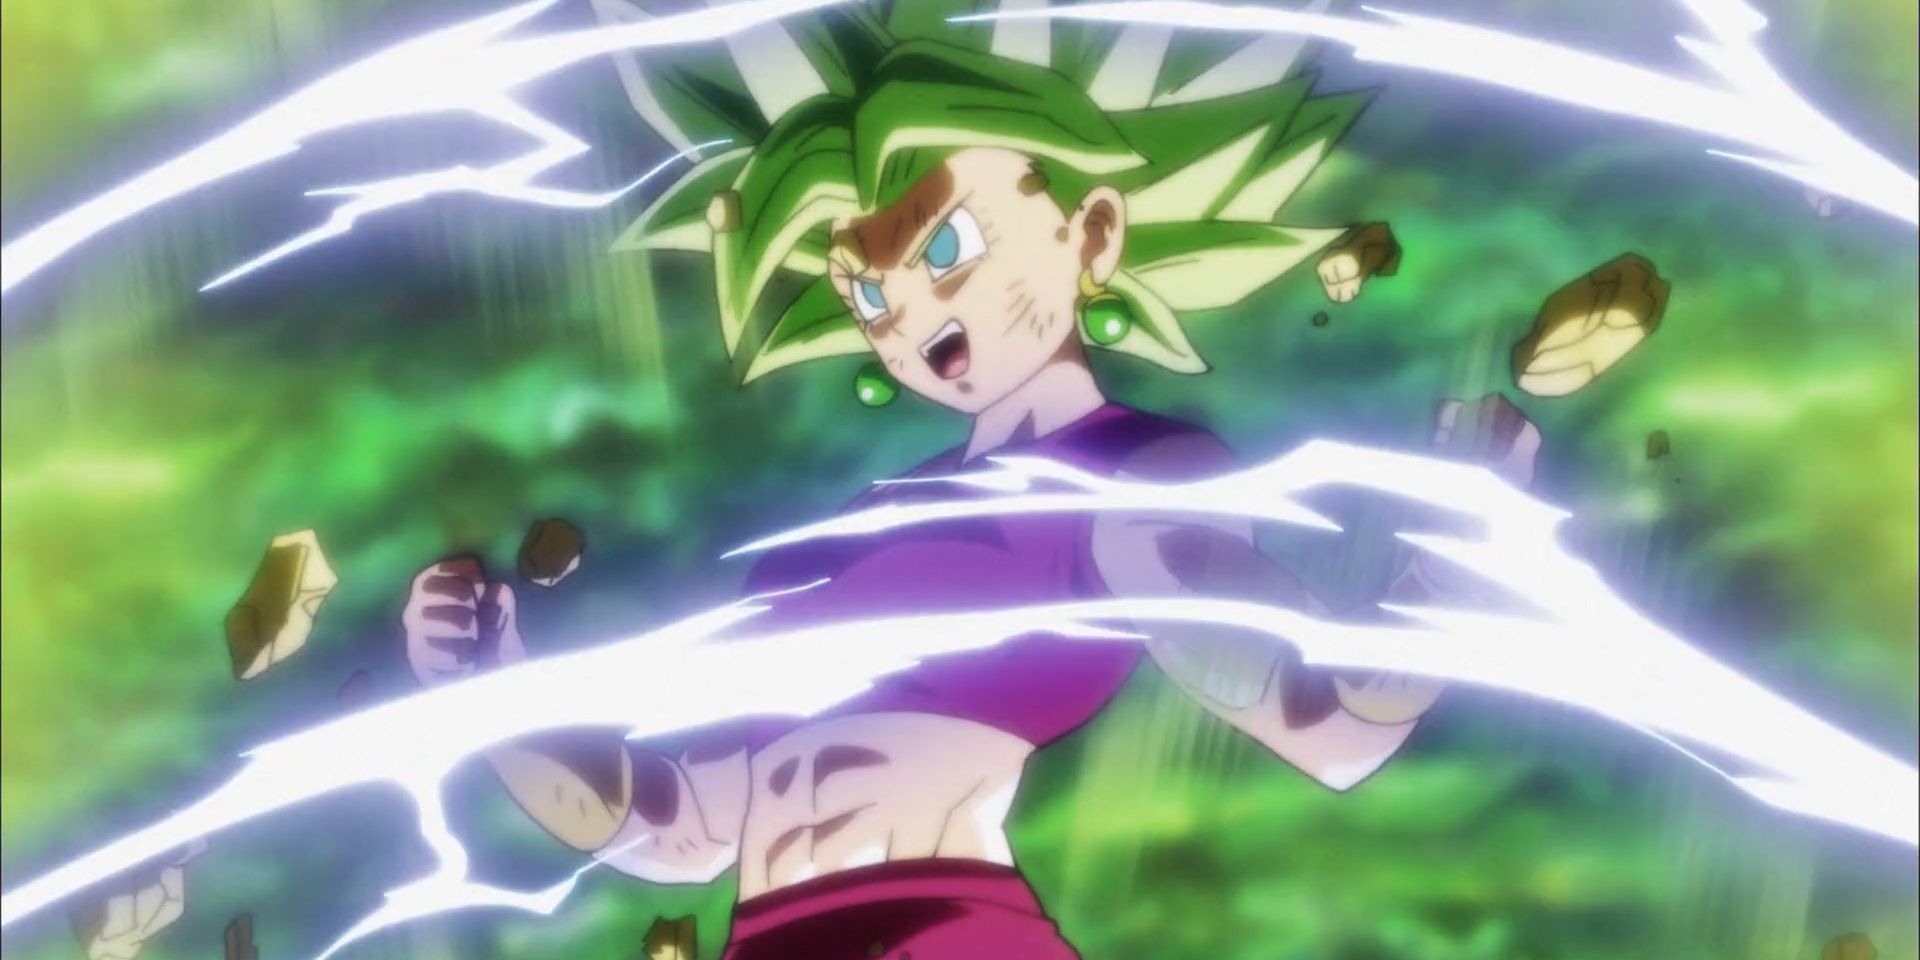 Kefla shows off her new Super Saiyan 2 strength in Dragon Ball Super's Tournament of Power